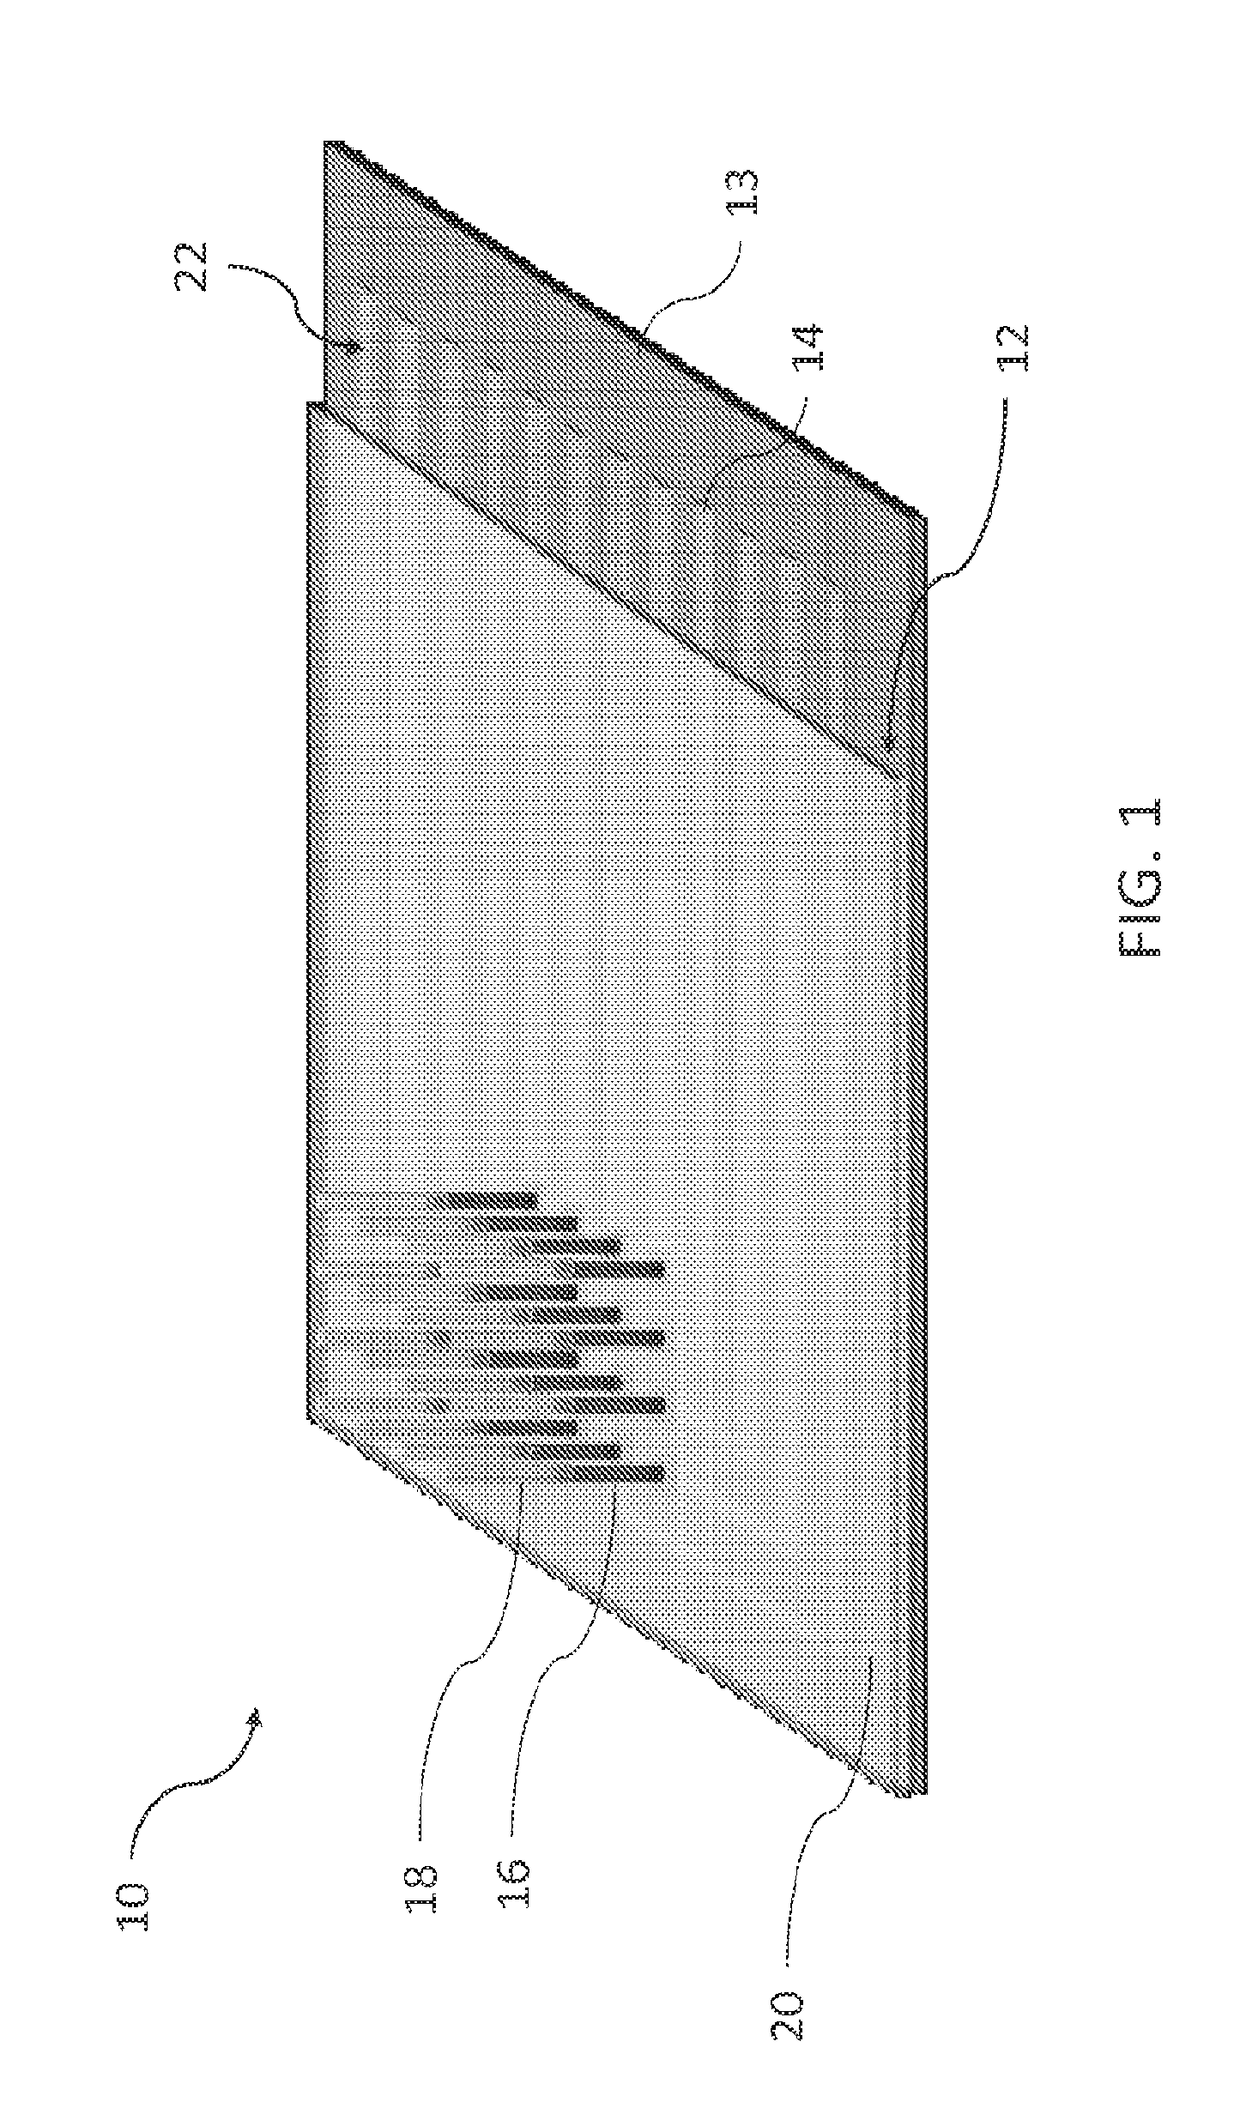 Flexible penetrating cortical multielectrode arrays, sensor devices and manufacturing methods